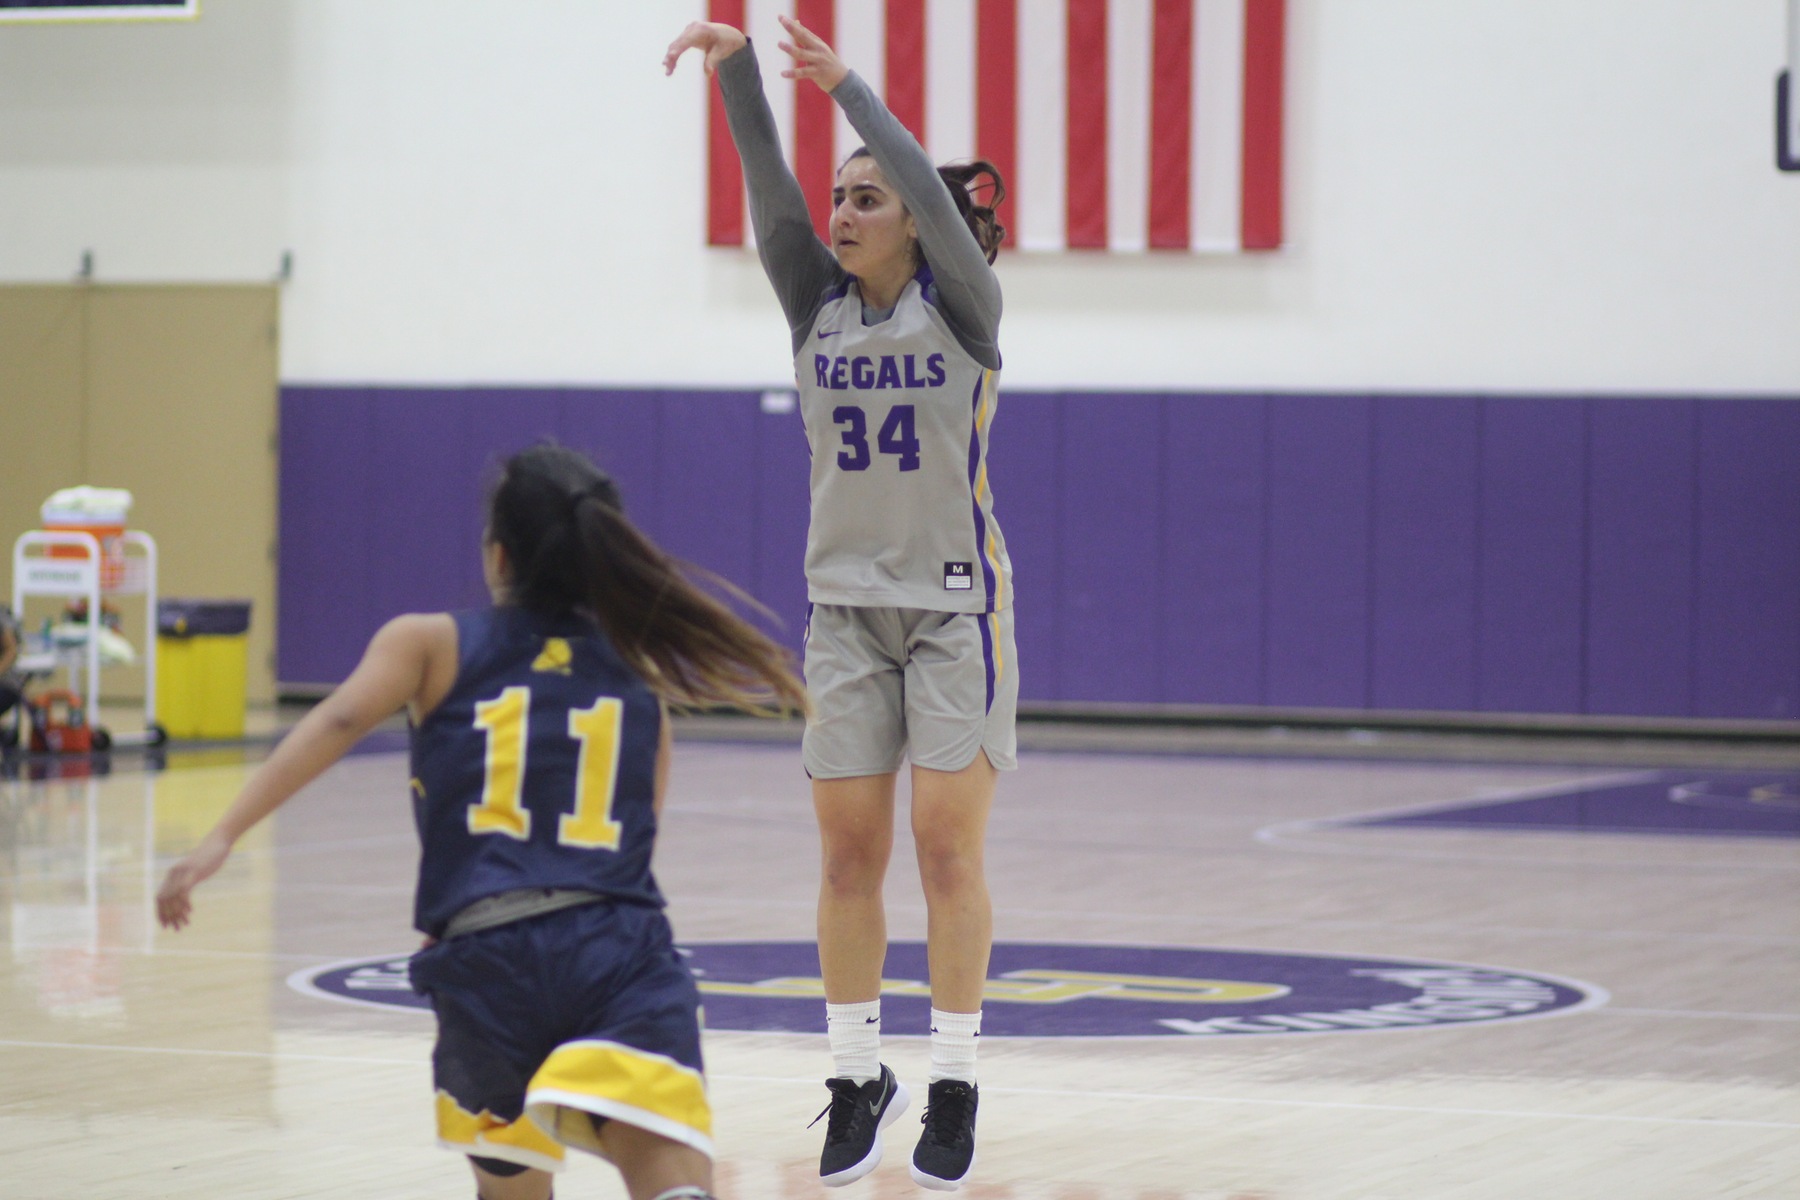 Regals’ Late Three-Pointers Seal Win